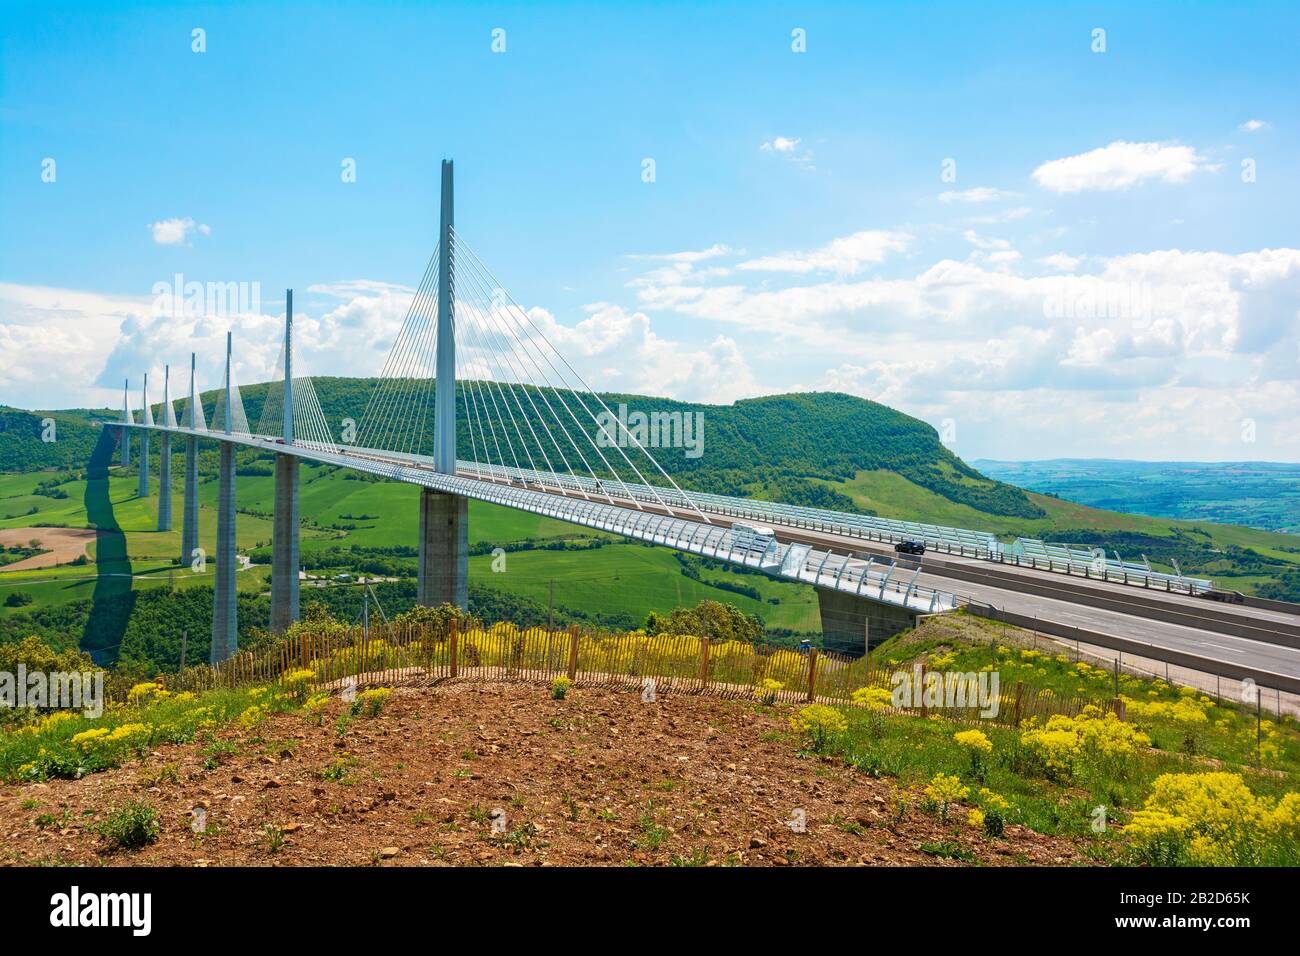 France, Viaduc de Millau (Millau Viaduct), spans Tarn River, view from belvedere viewpoint Stock Photo